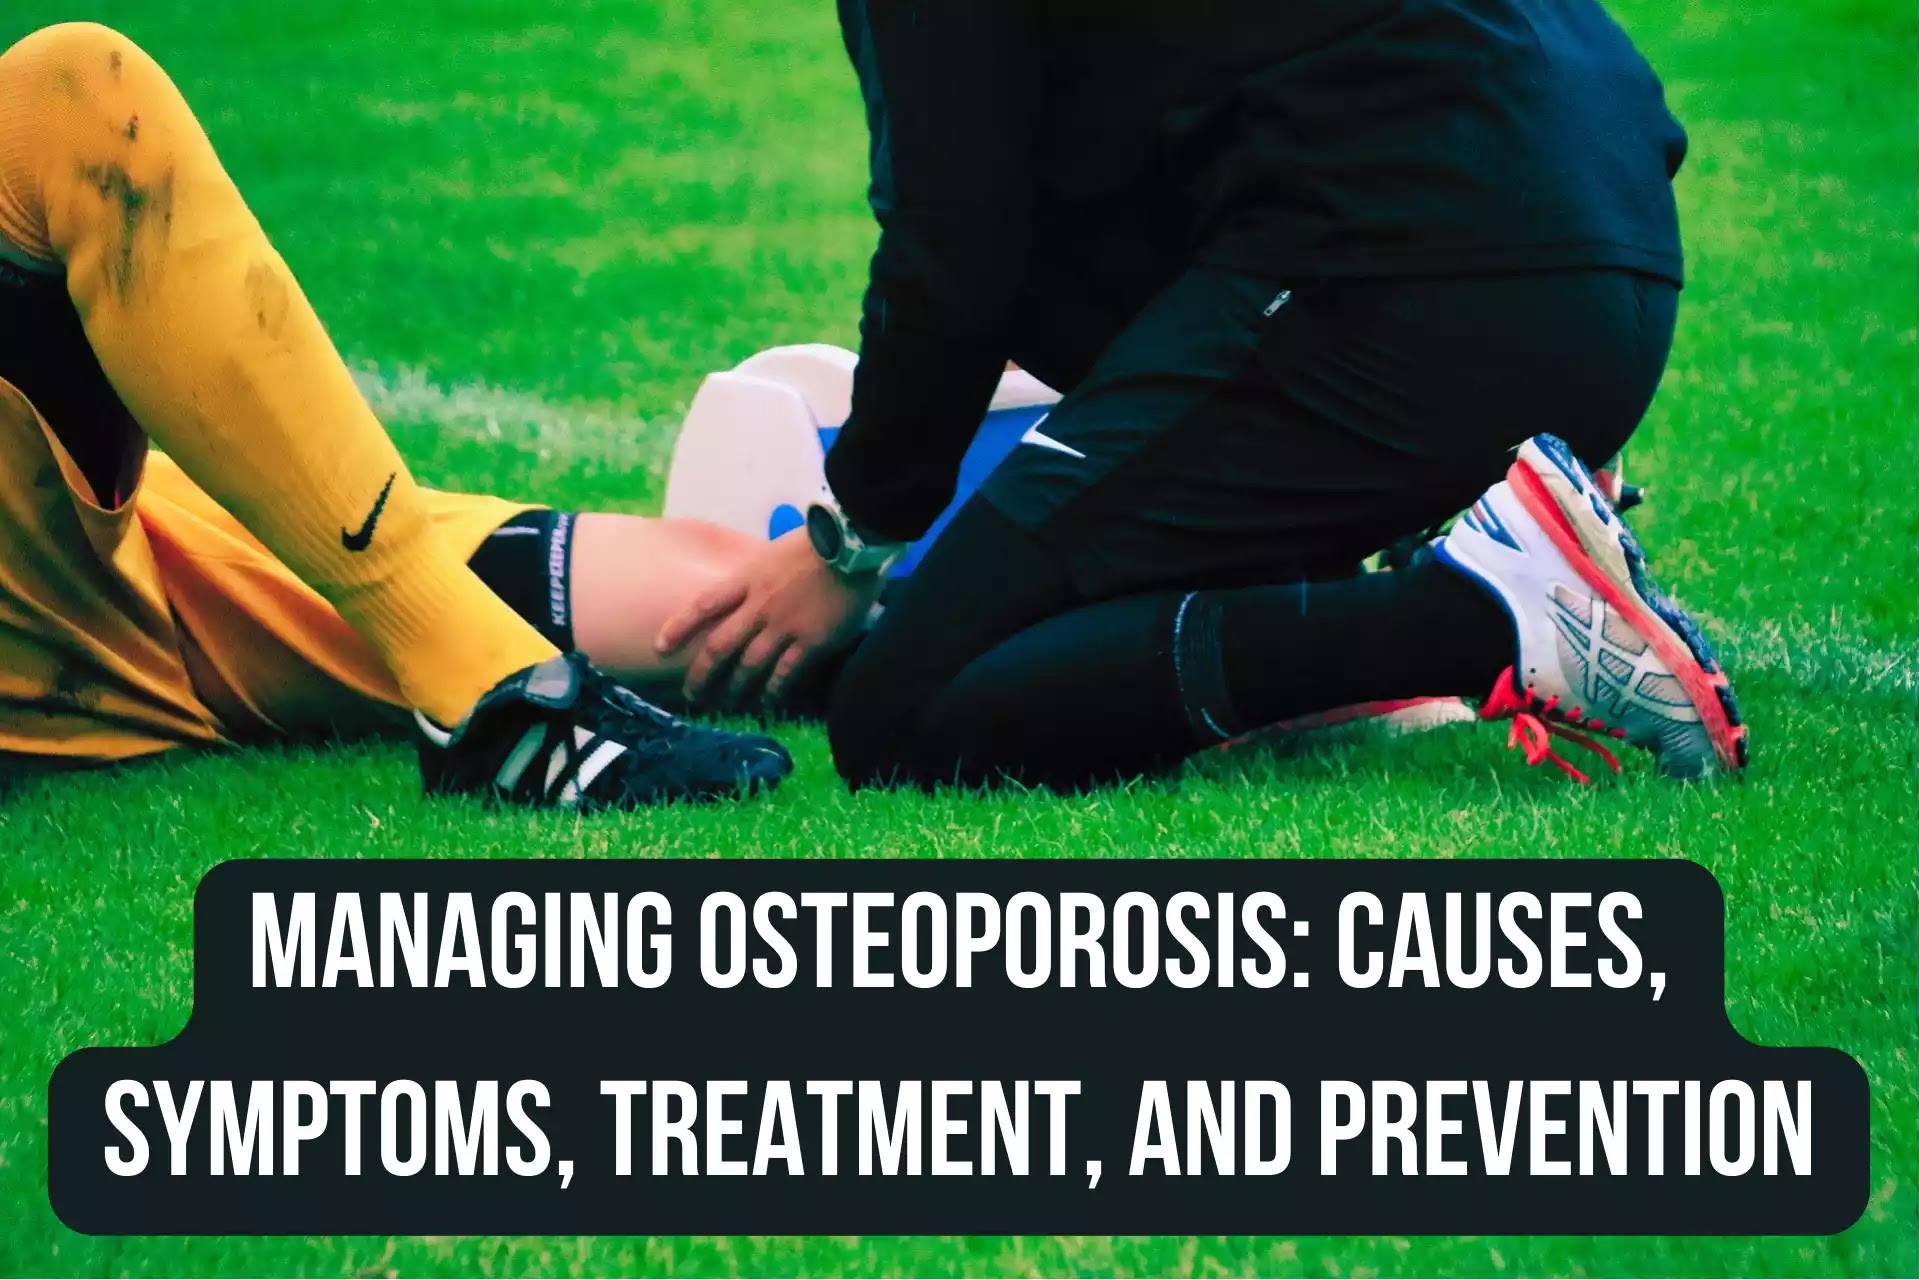 Complete Guide to Understanding and Managing Osteoporosis: Causes, Symptoms, Diagnosis, Treatment, and Prevention